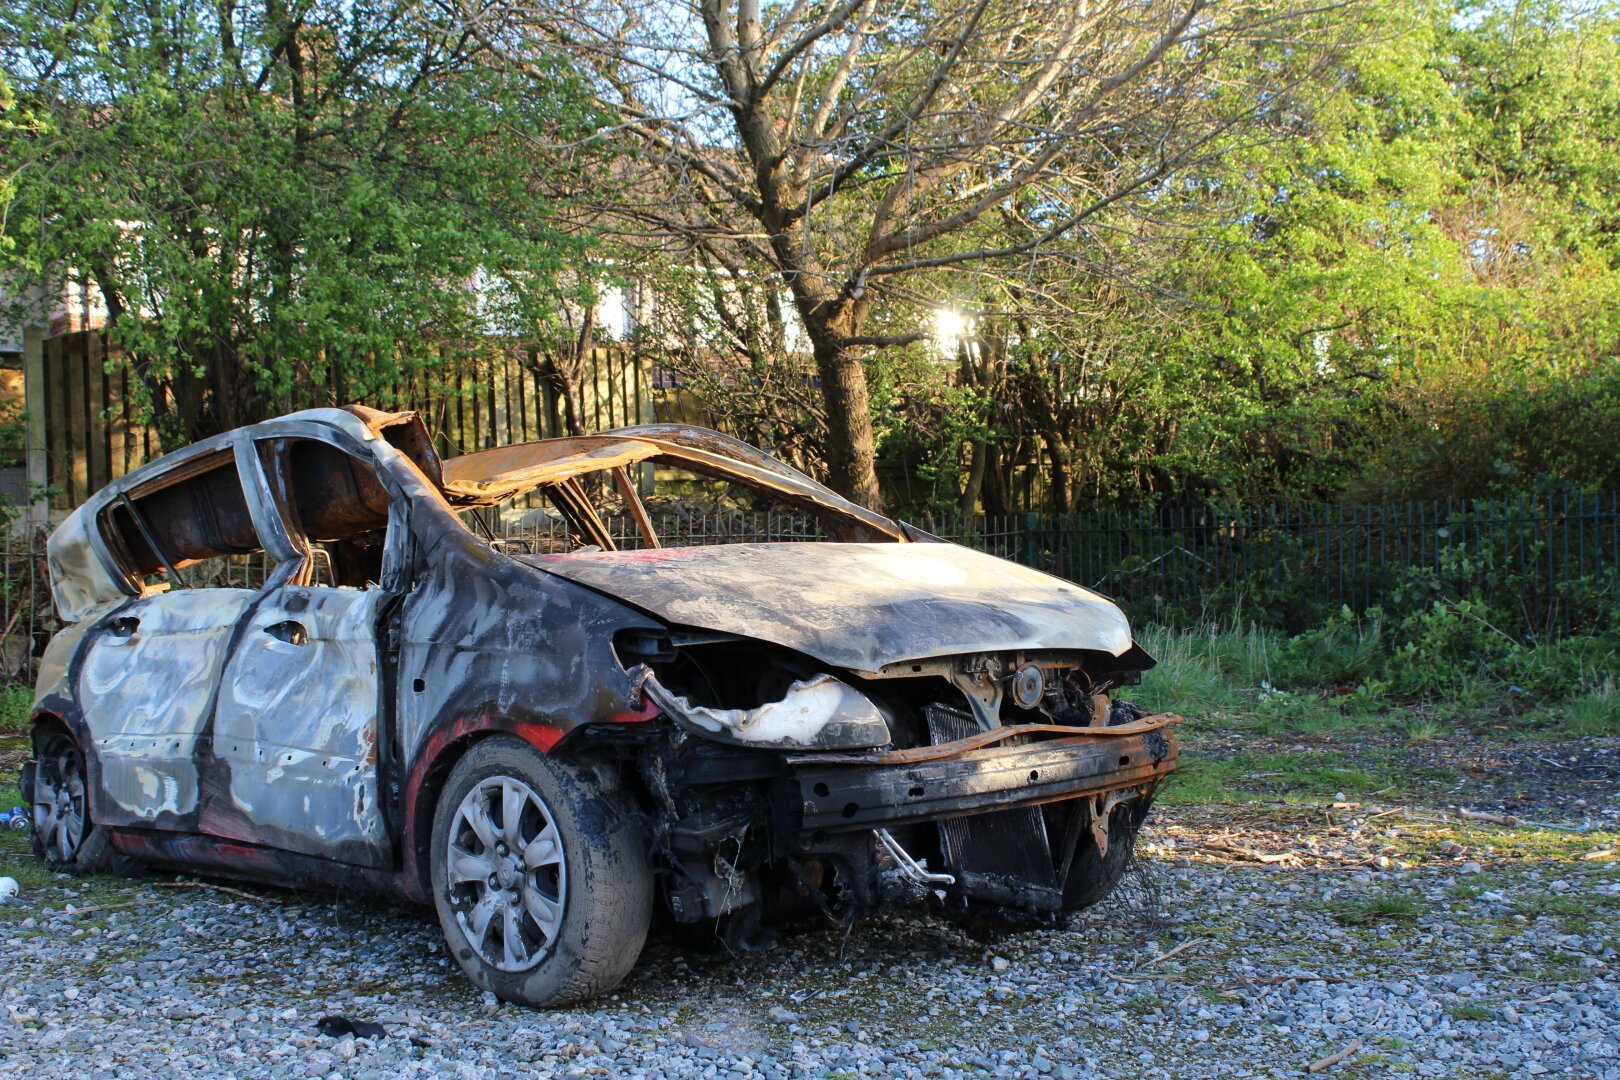 a burned car carcass found in a park in sheffield